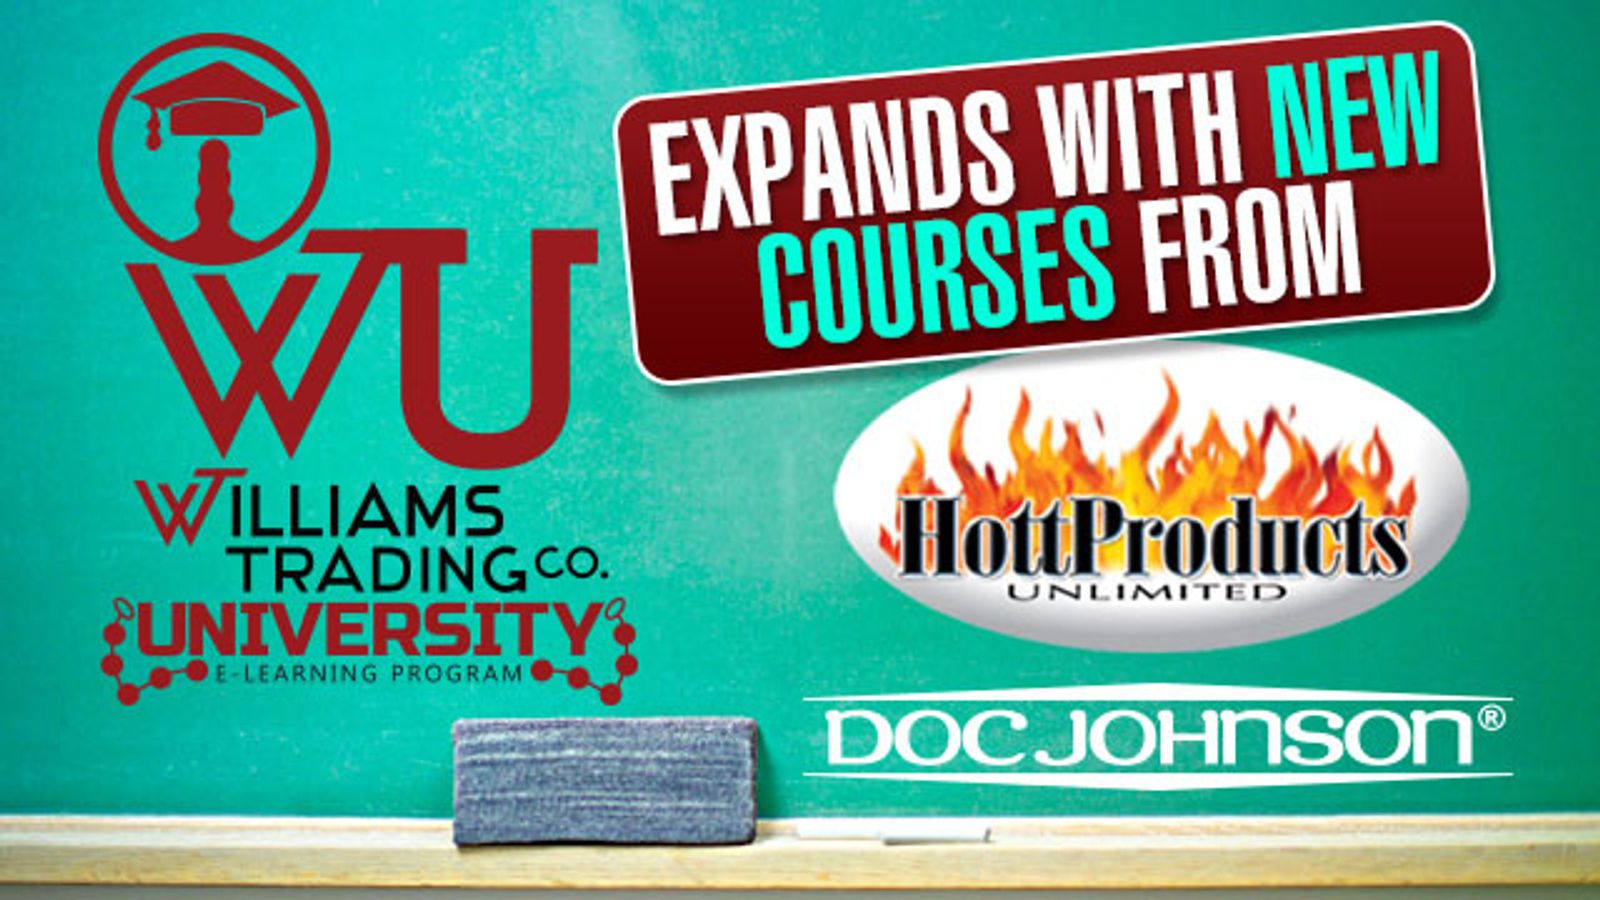 Williams Trading University Adds Courses For Doc Johnson, Hott Products